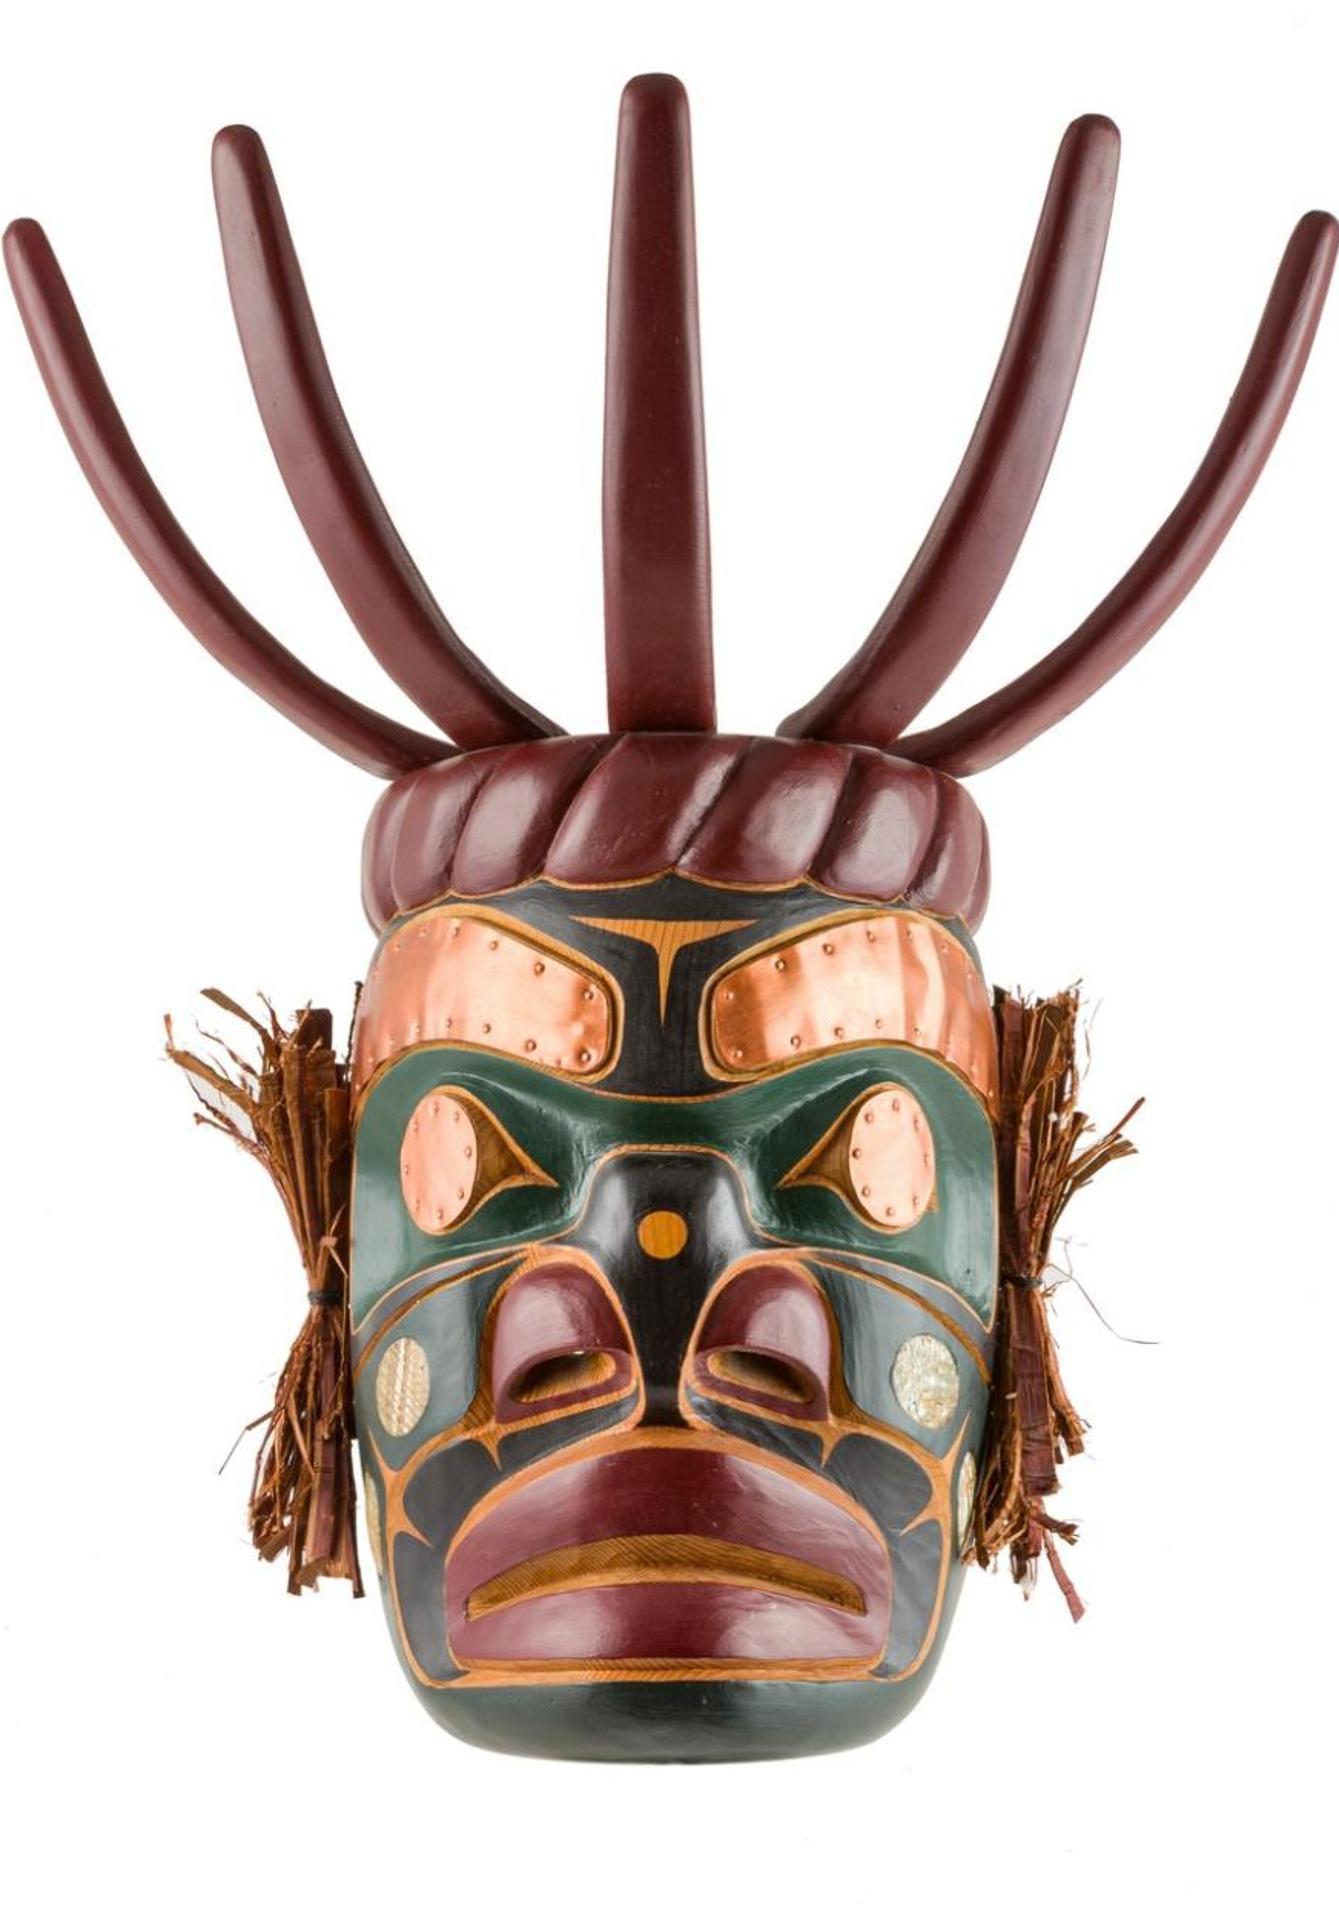 Bill Henderson (1950) - a carved and polychromed Komokwa - King of the Sea mask